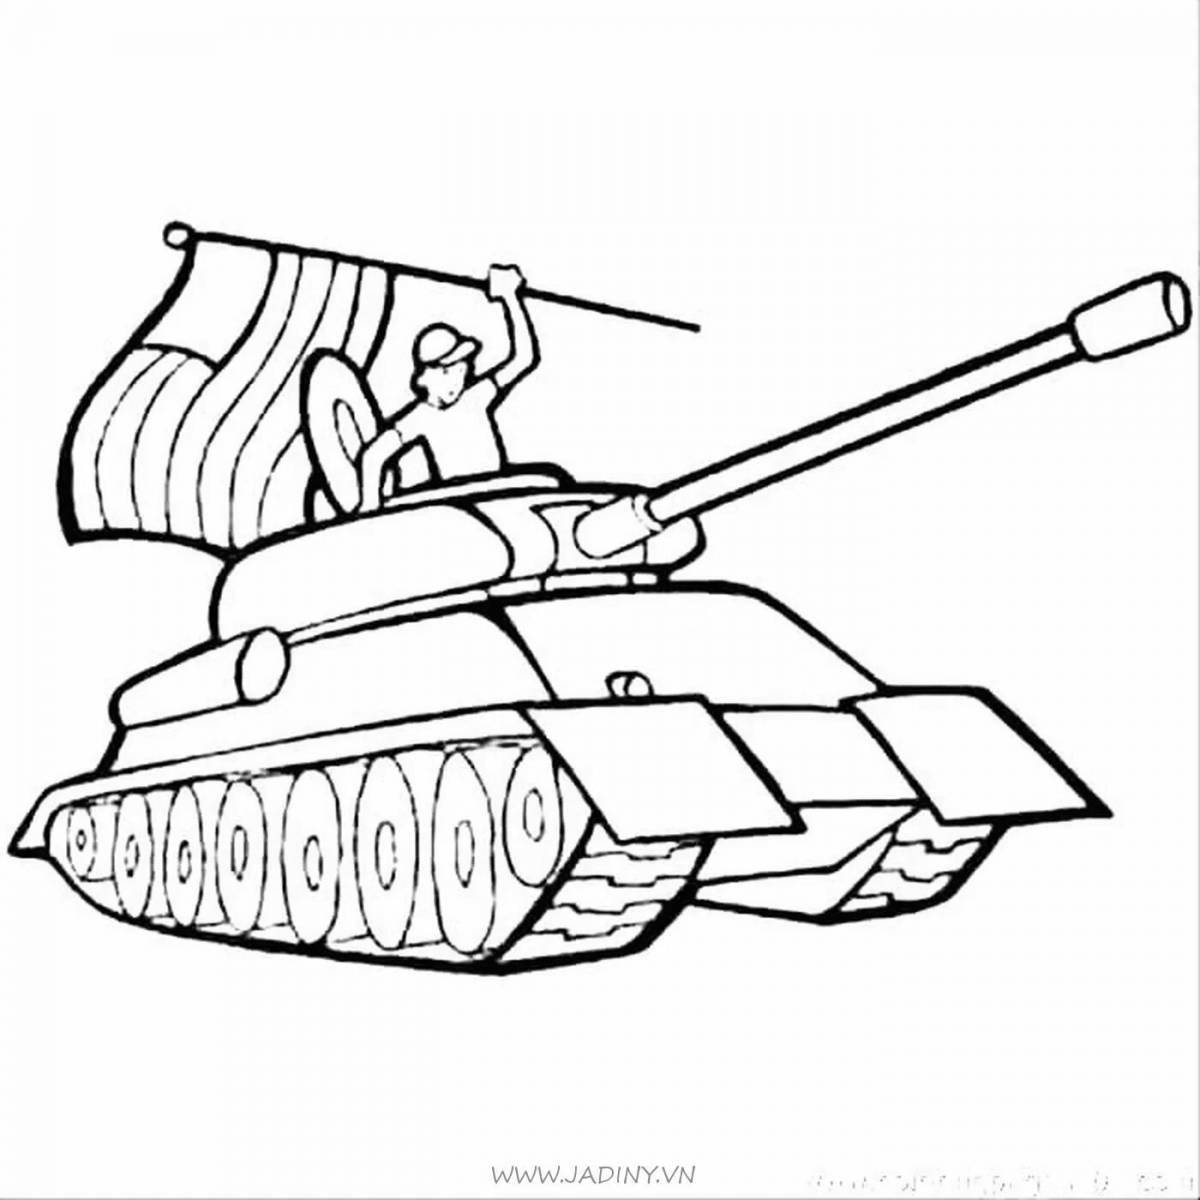 Colourful soldier and tank coloring book